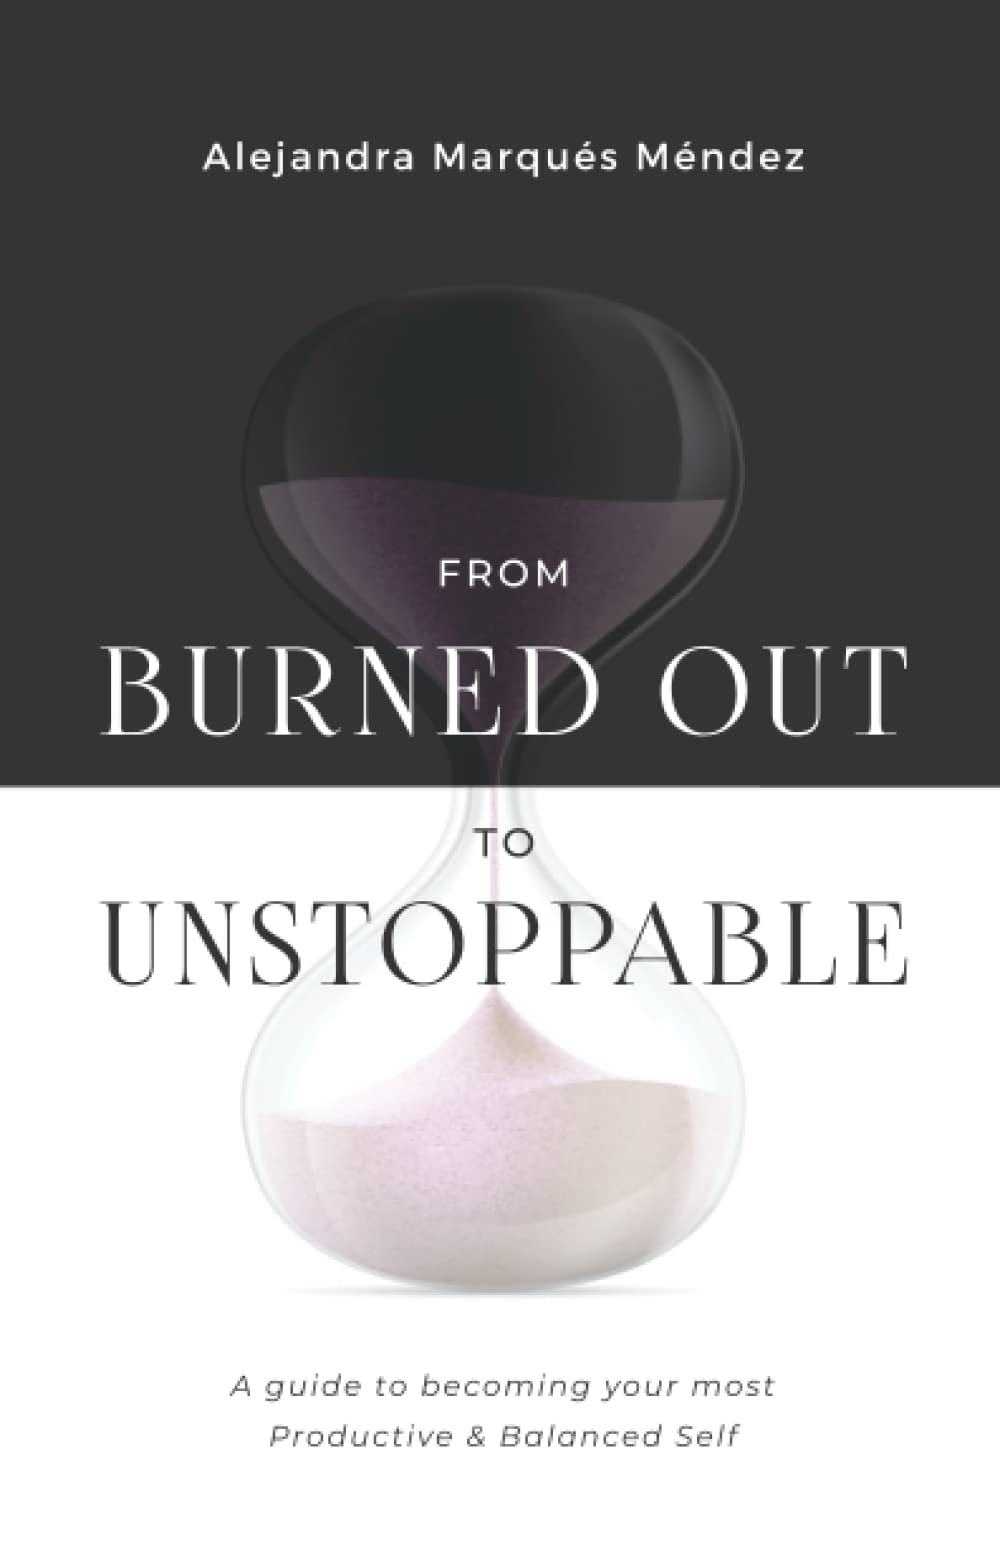 47. From Burned Out to Unstoppable l Alejandra Marques Mendez